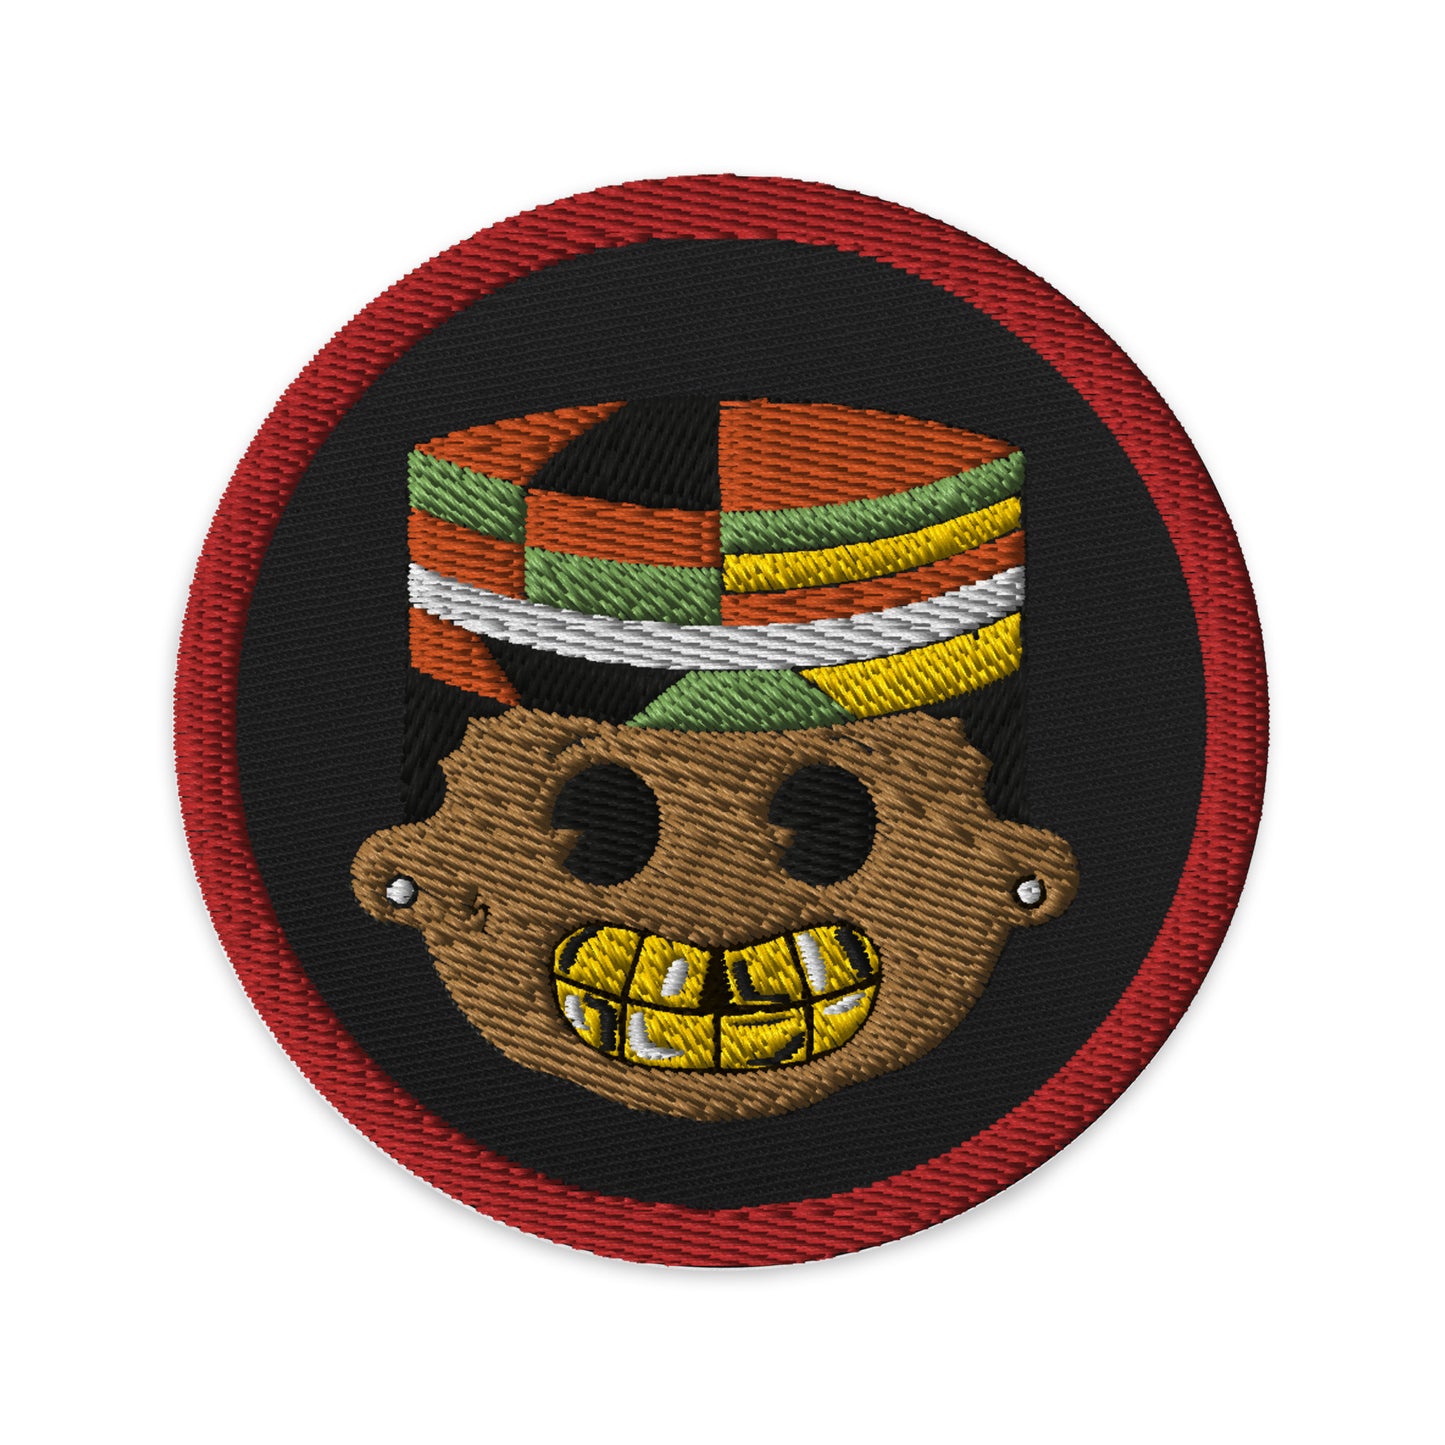 Black Joy Domo Embroidered Patch